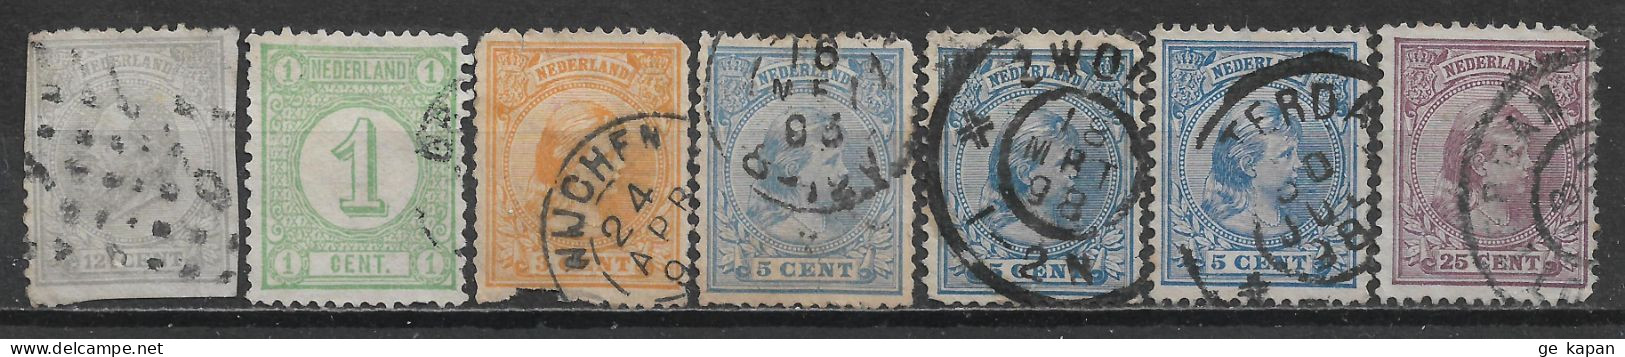 1875-1894 NETHERLANDS Set Of 7 Used Stamps (Michel # 22D,31aD,34a,35ab,35b,42b) CV €11.10 - Used Stamps